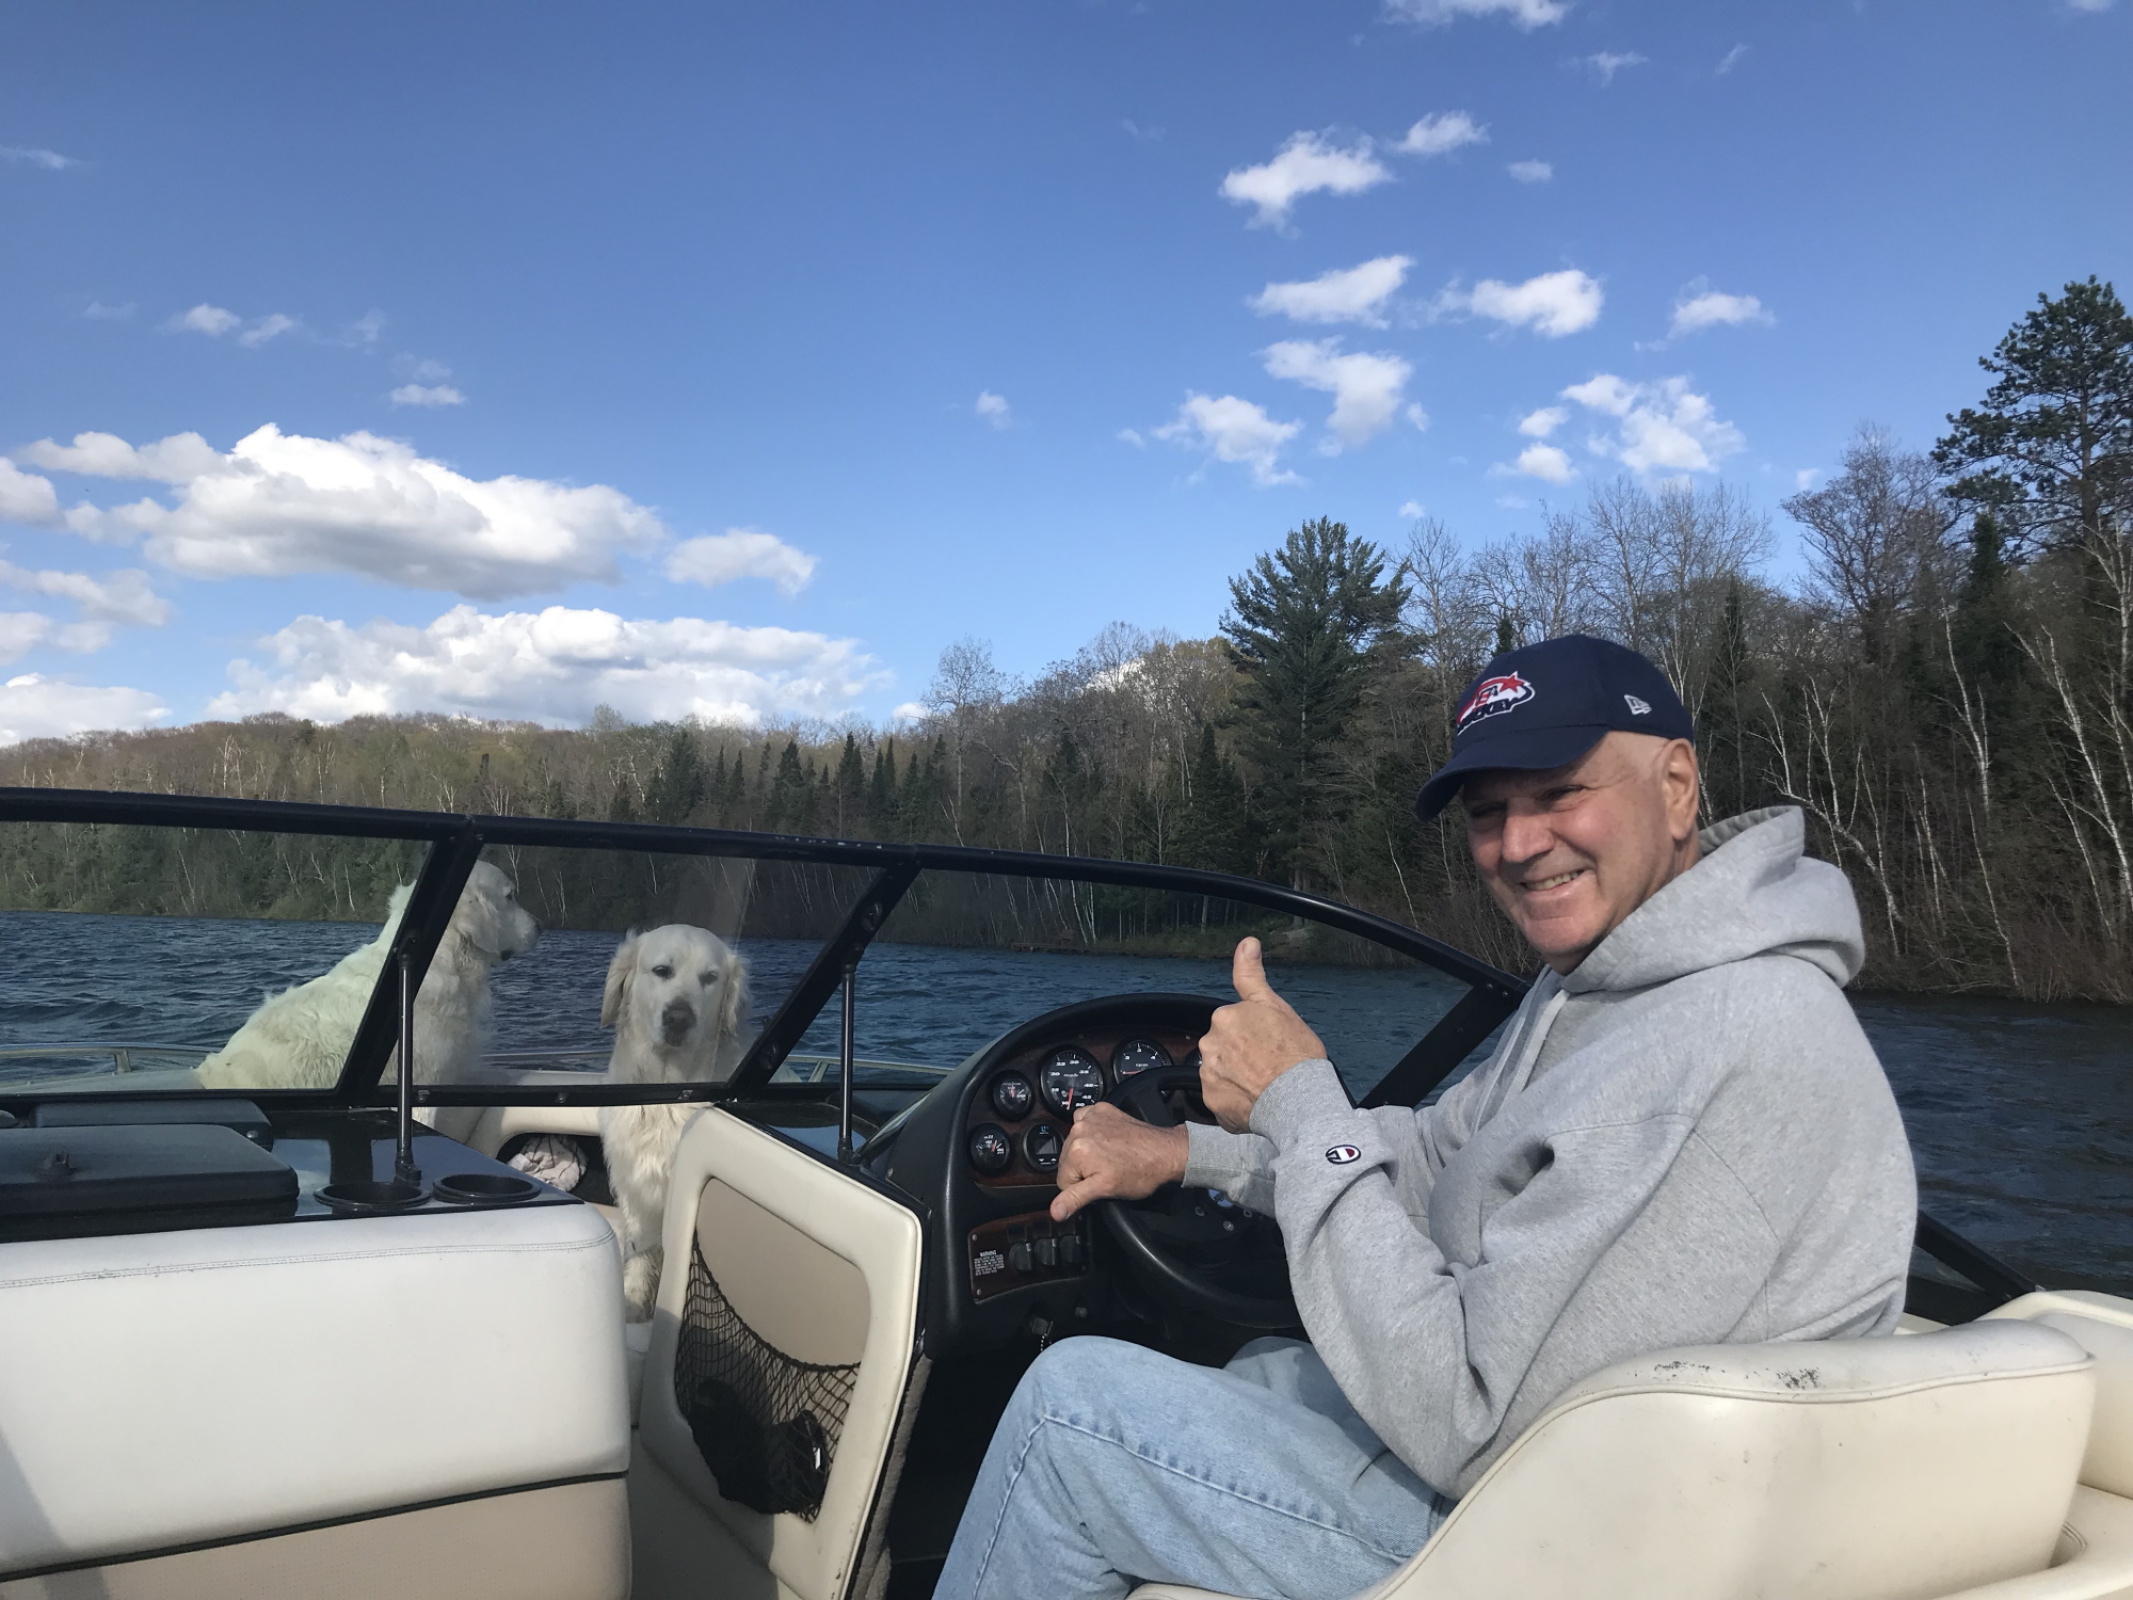 Papa is still the captain of the boat